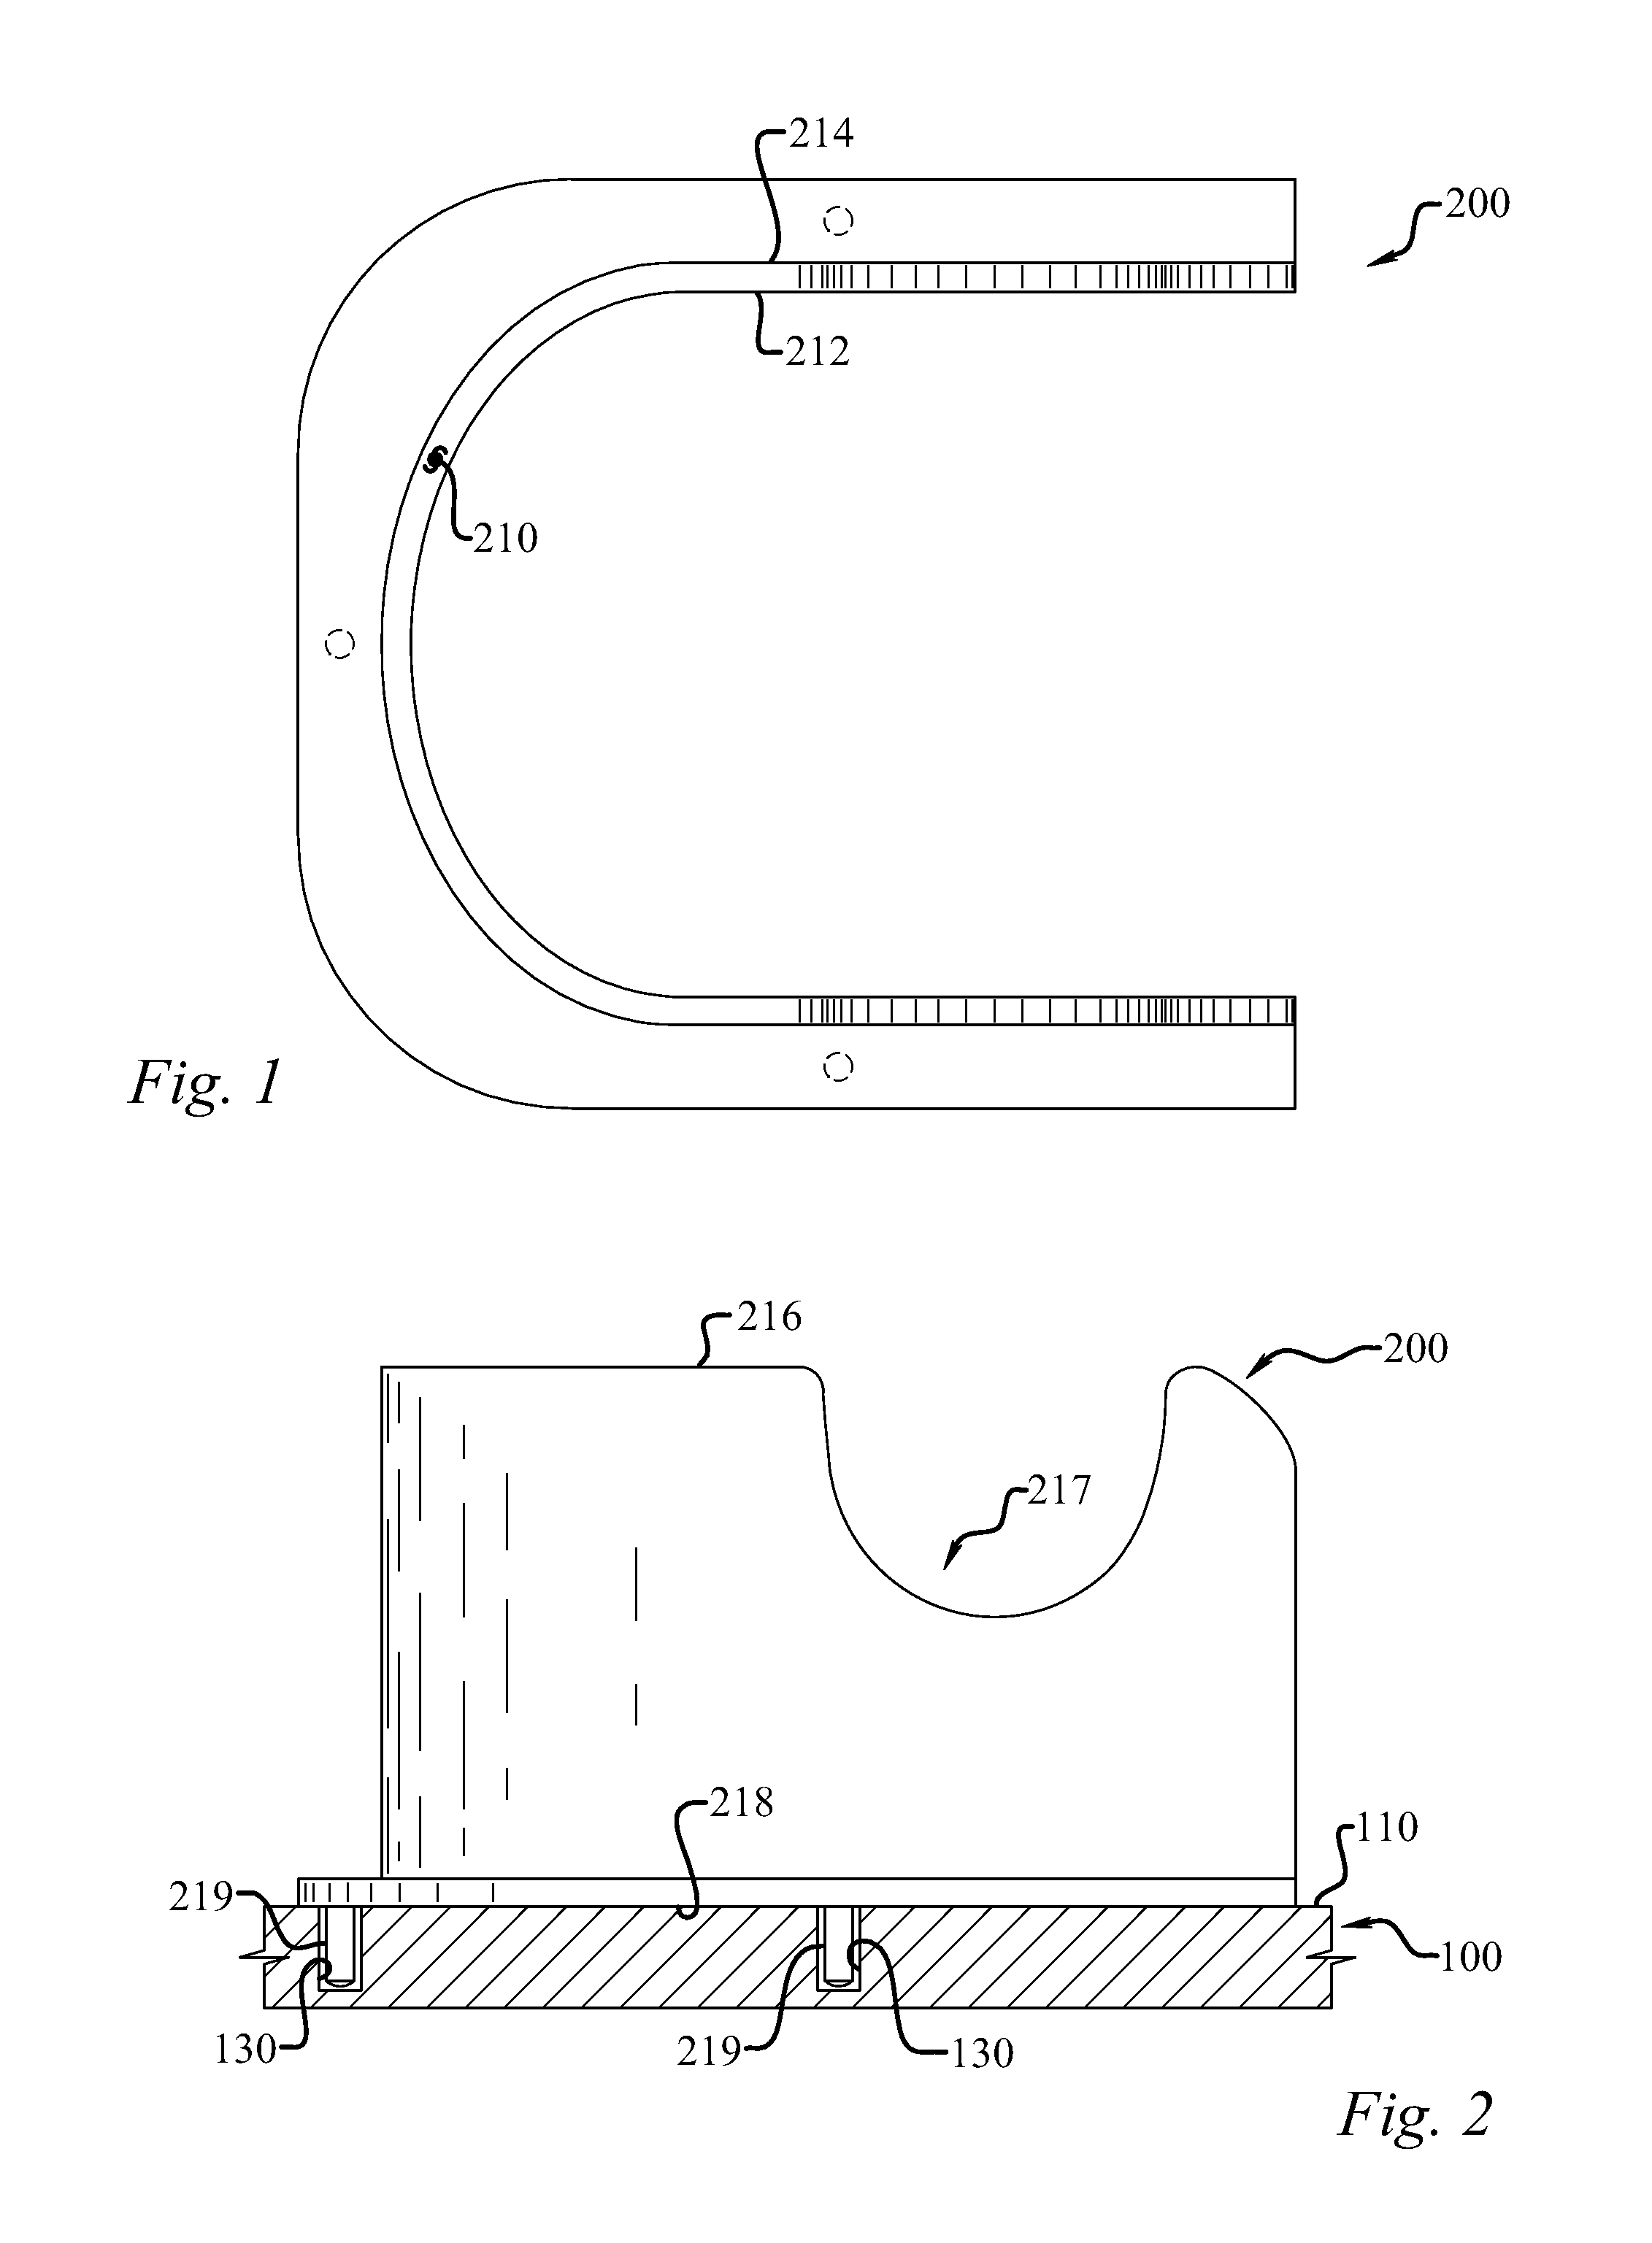 Immobilization system